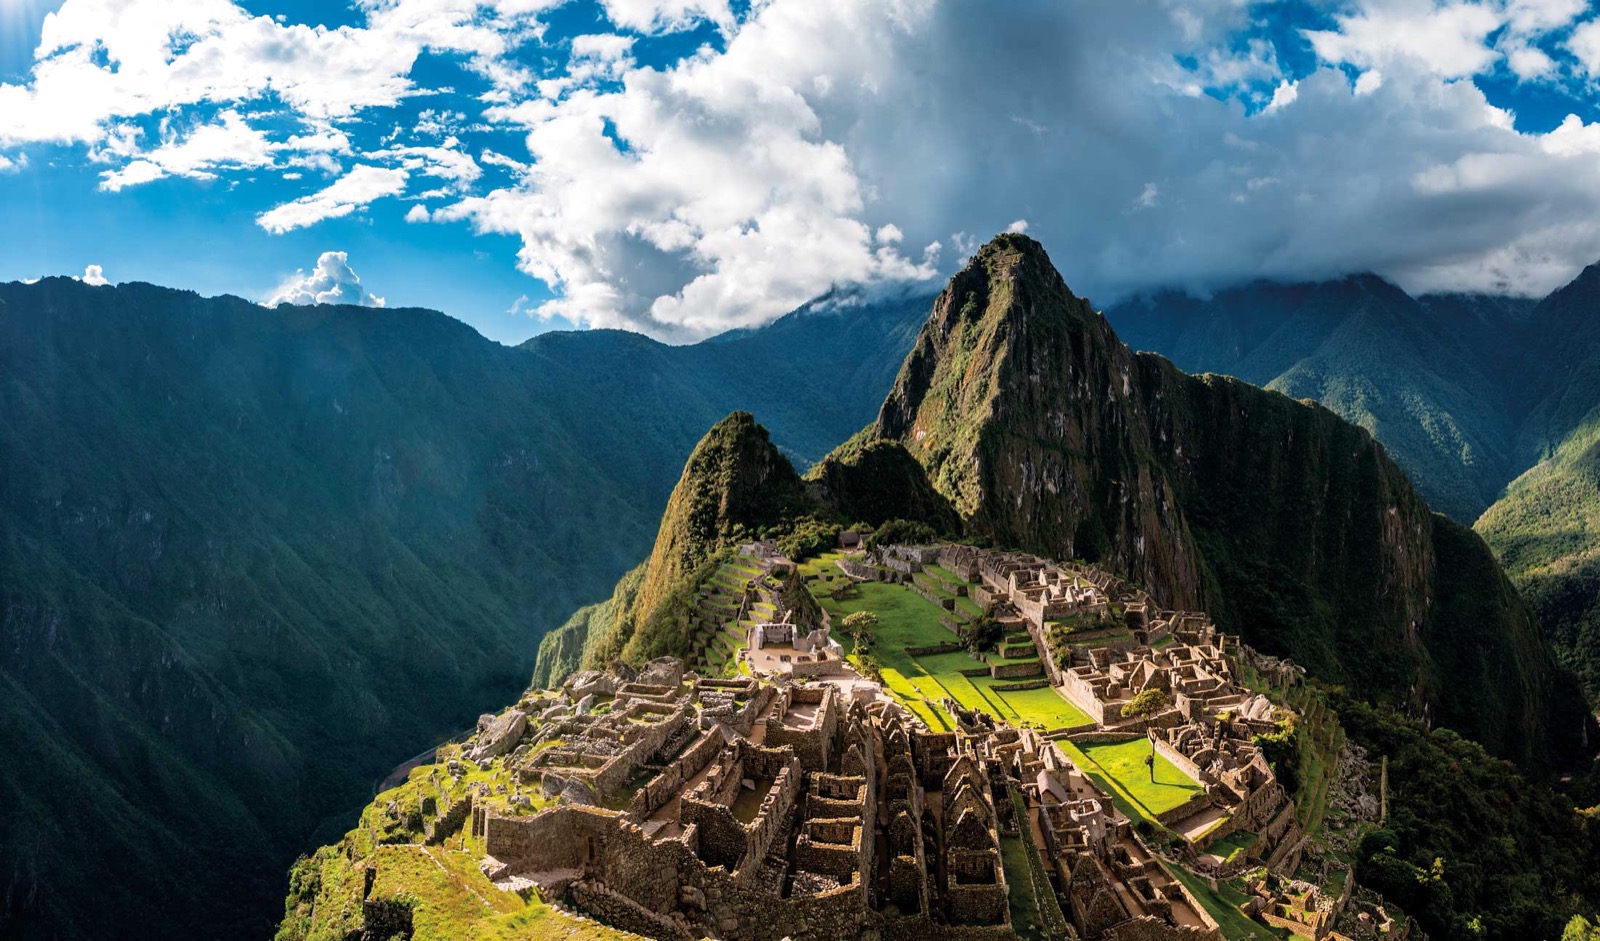 This General Knowledge Quiz Is Not That Hard, So to Impress Me, You’ll Need to Score 16/20 Machu Picchu, Inca Empire civilization, Peru